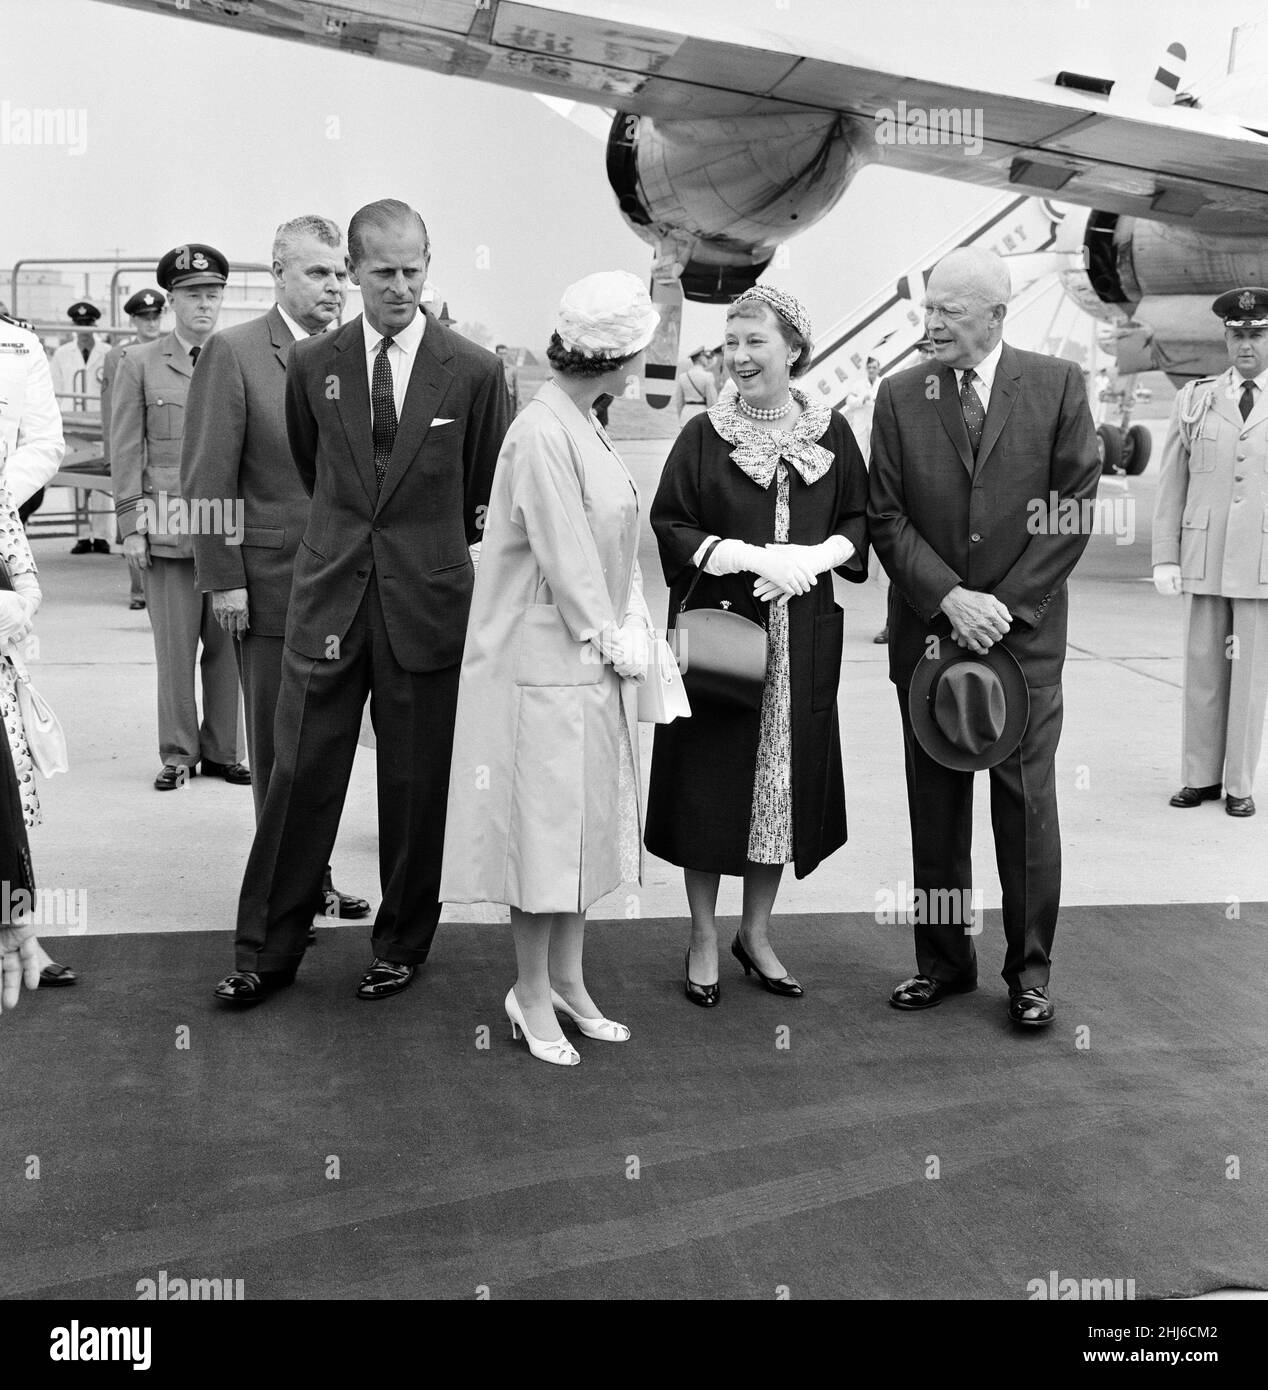 Queen Elizabeth II and The Duke of Edinburgh welcome President Eisenhower and his wife when they arrived by air from Washington at the Royal Canadian Air Force base at St Hubert, near Montreal. 26th June 1959. Stock Photo